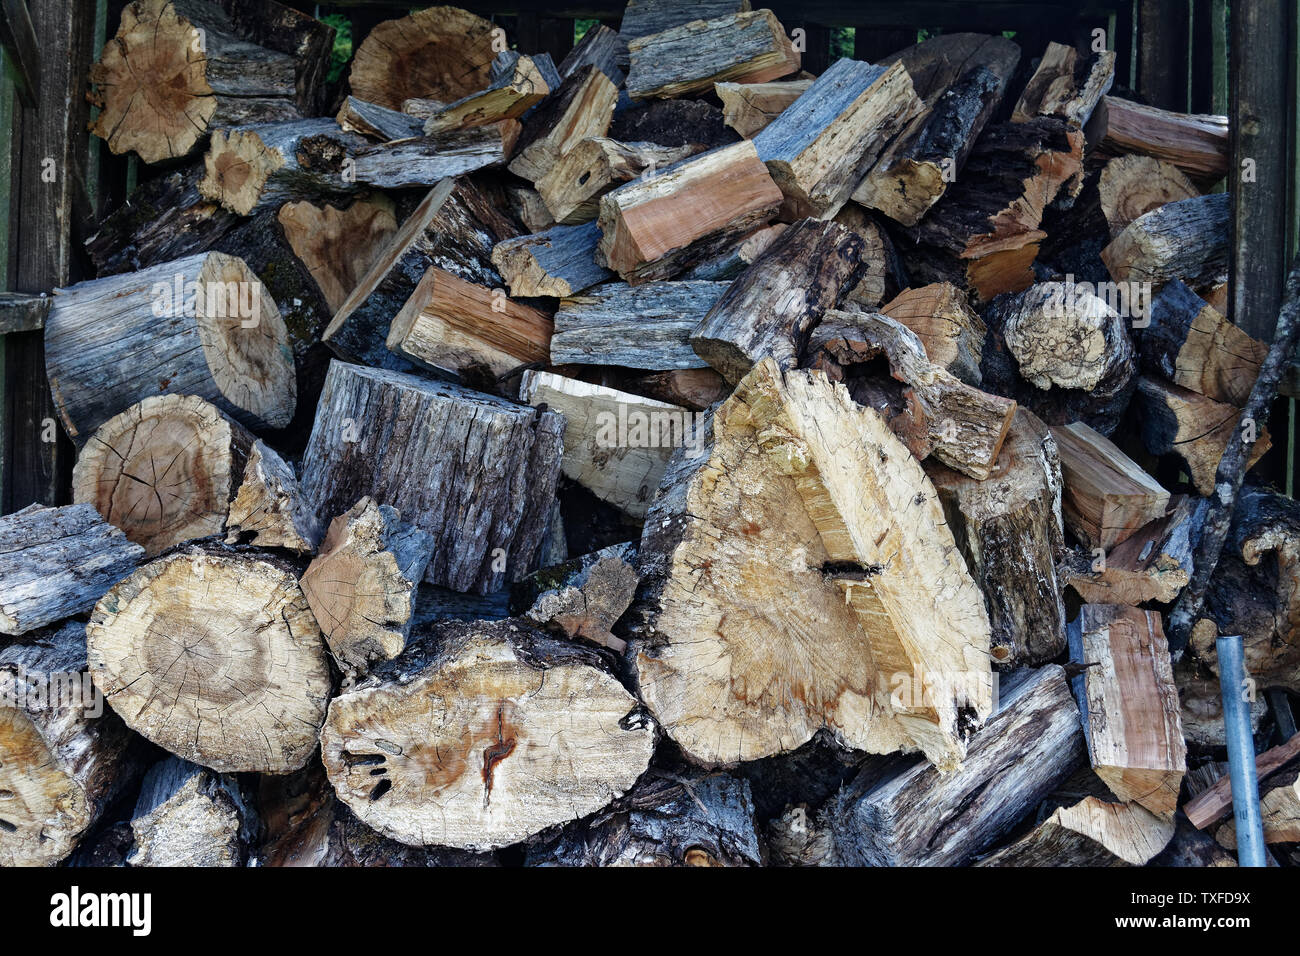 Large and small pieces of firewood ready to keep the house warm and toasty during the winter season. Stock Photo